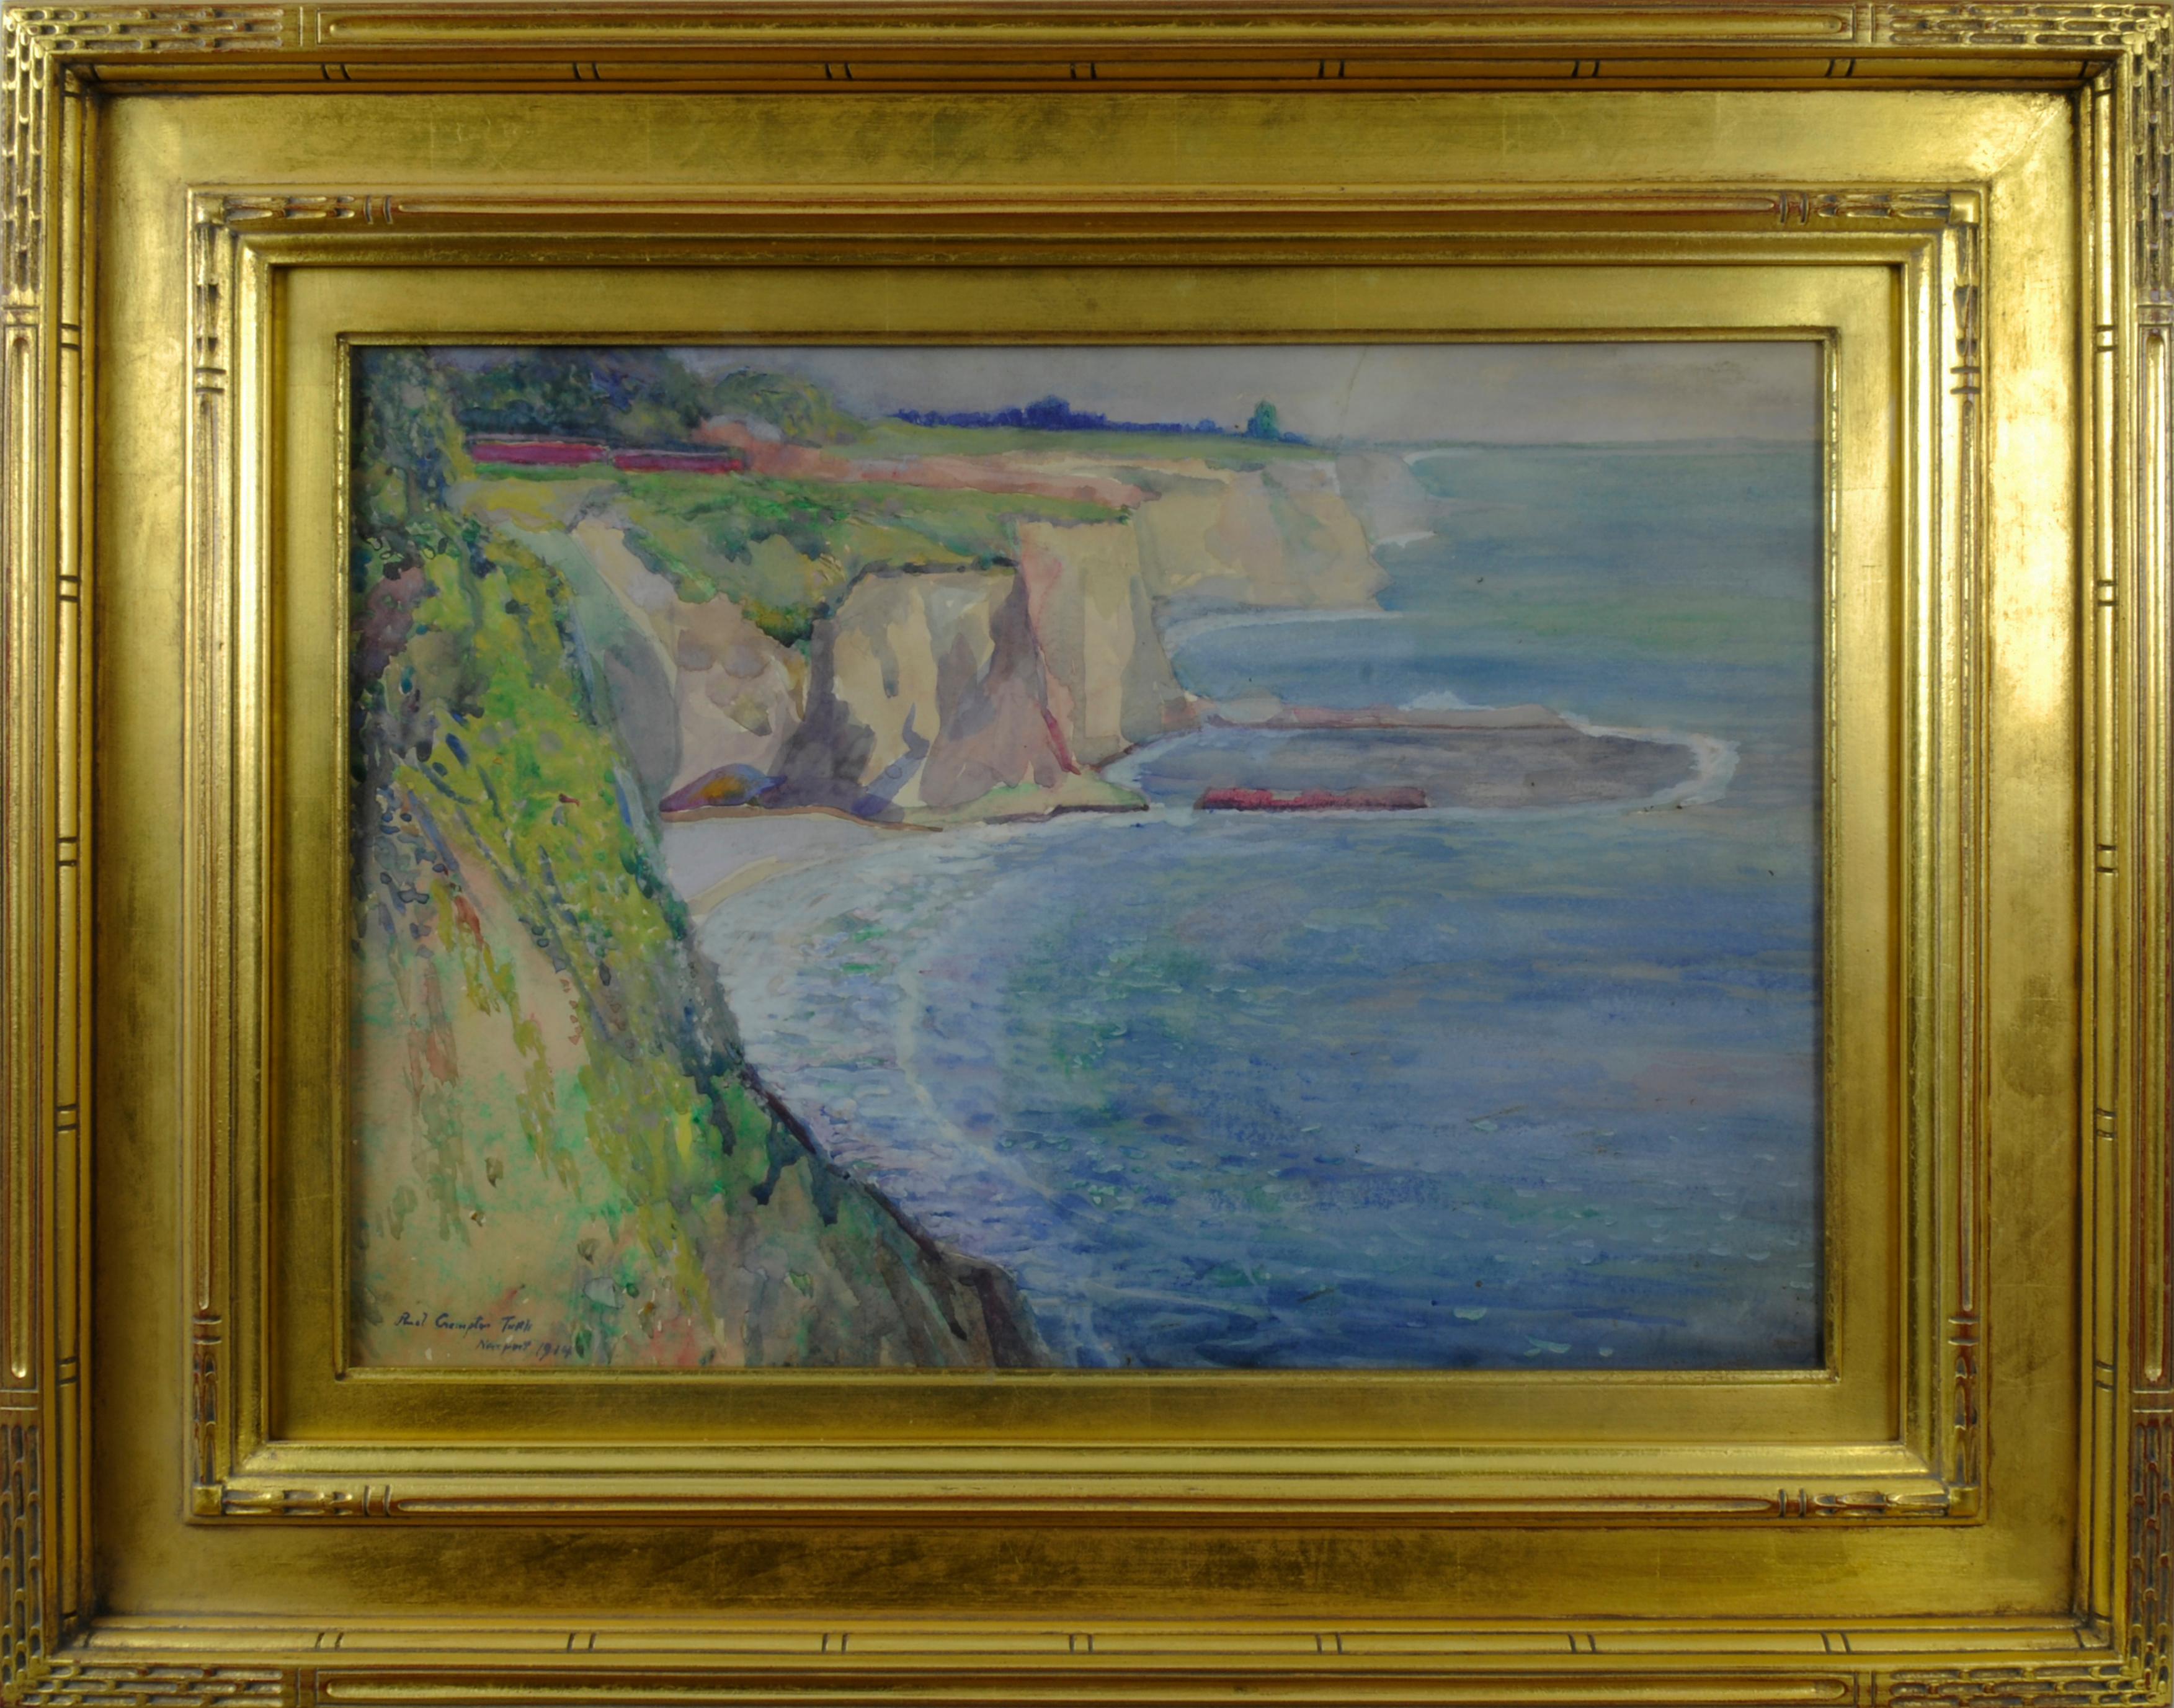 Newport or The Cliffs at Newport - Art by Ruel Crompton Tuttle